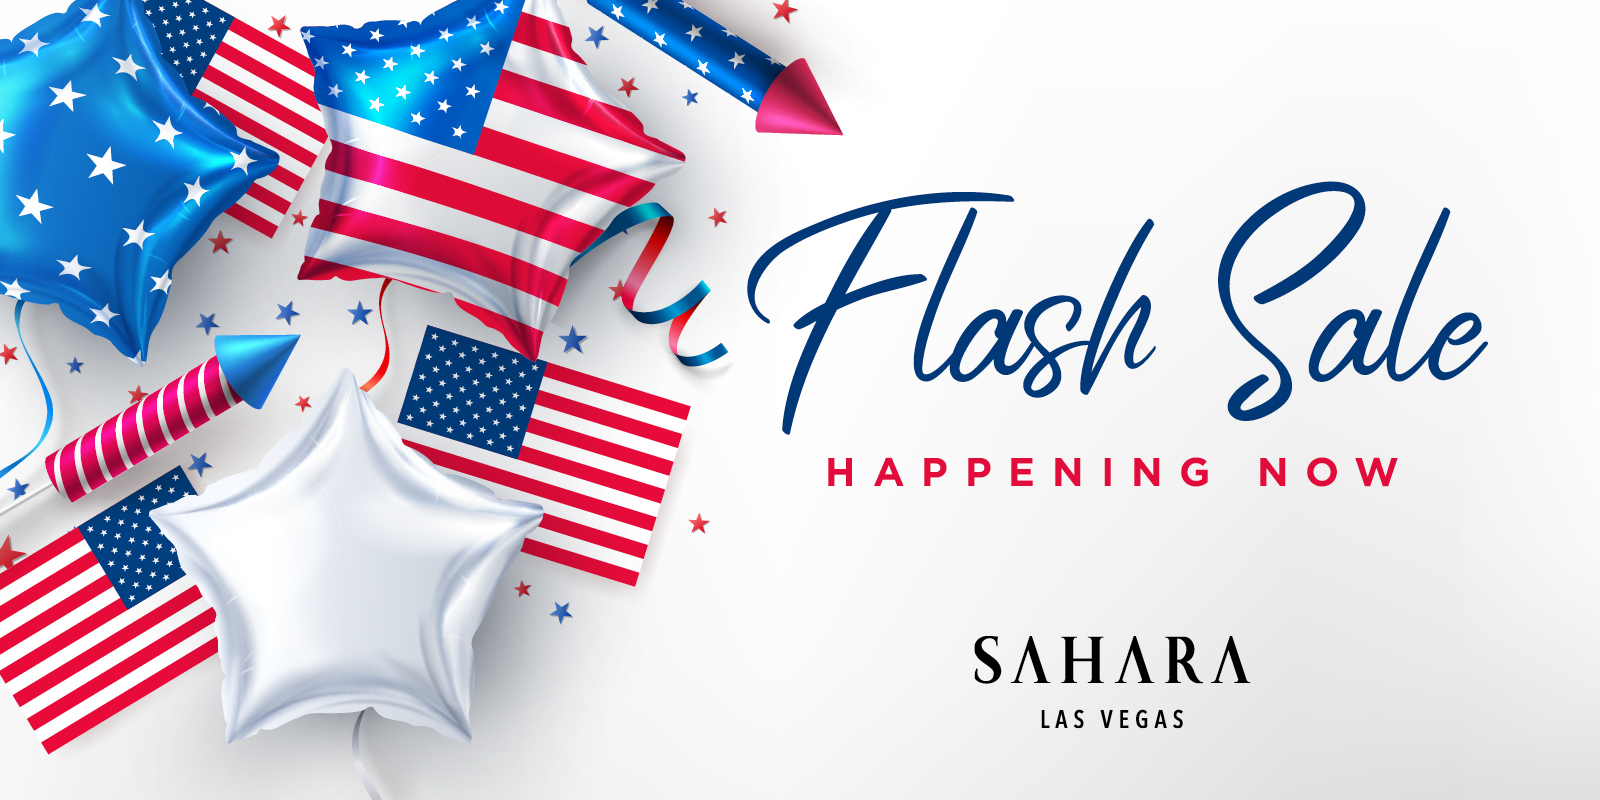 Flash sale copy with patriotic elements in the image